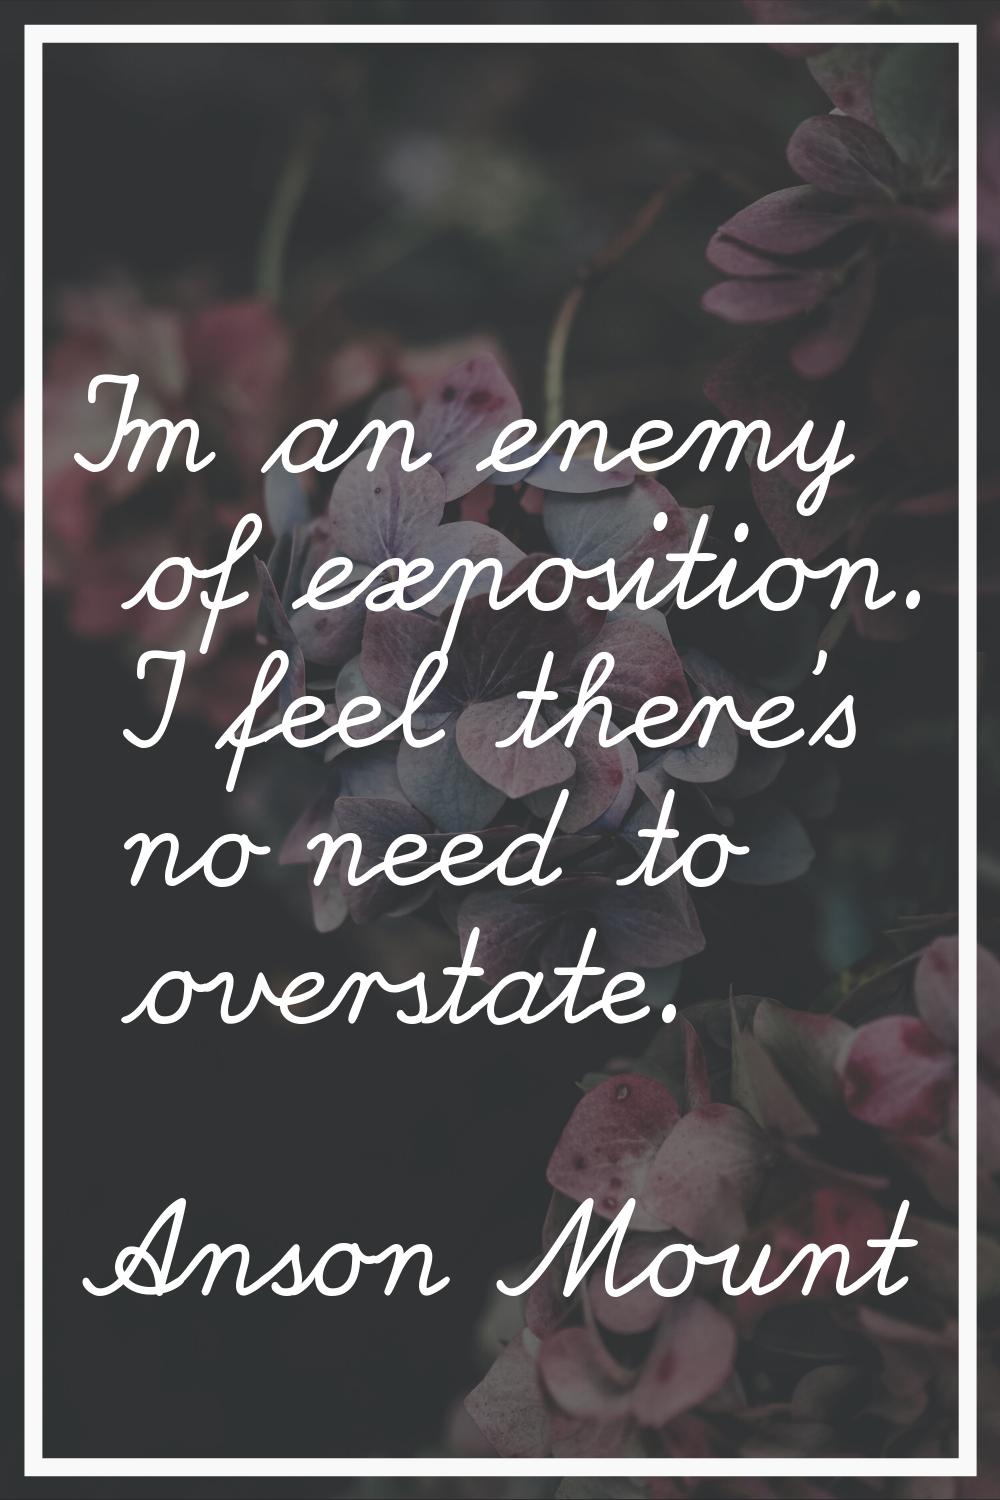 I'm an enemy of exposition. I feel there's no need to overstate.